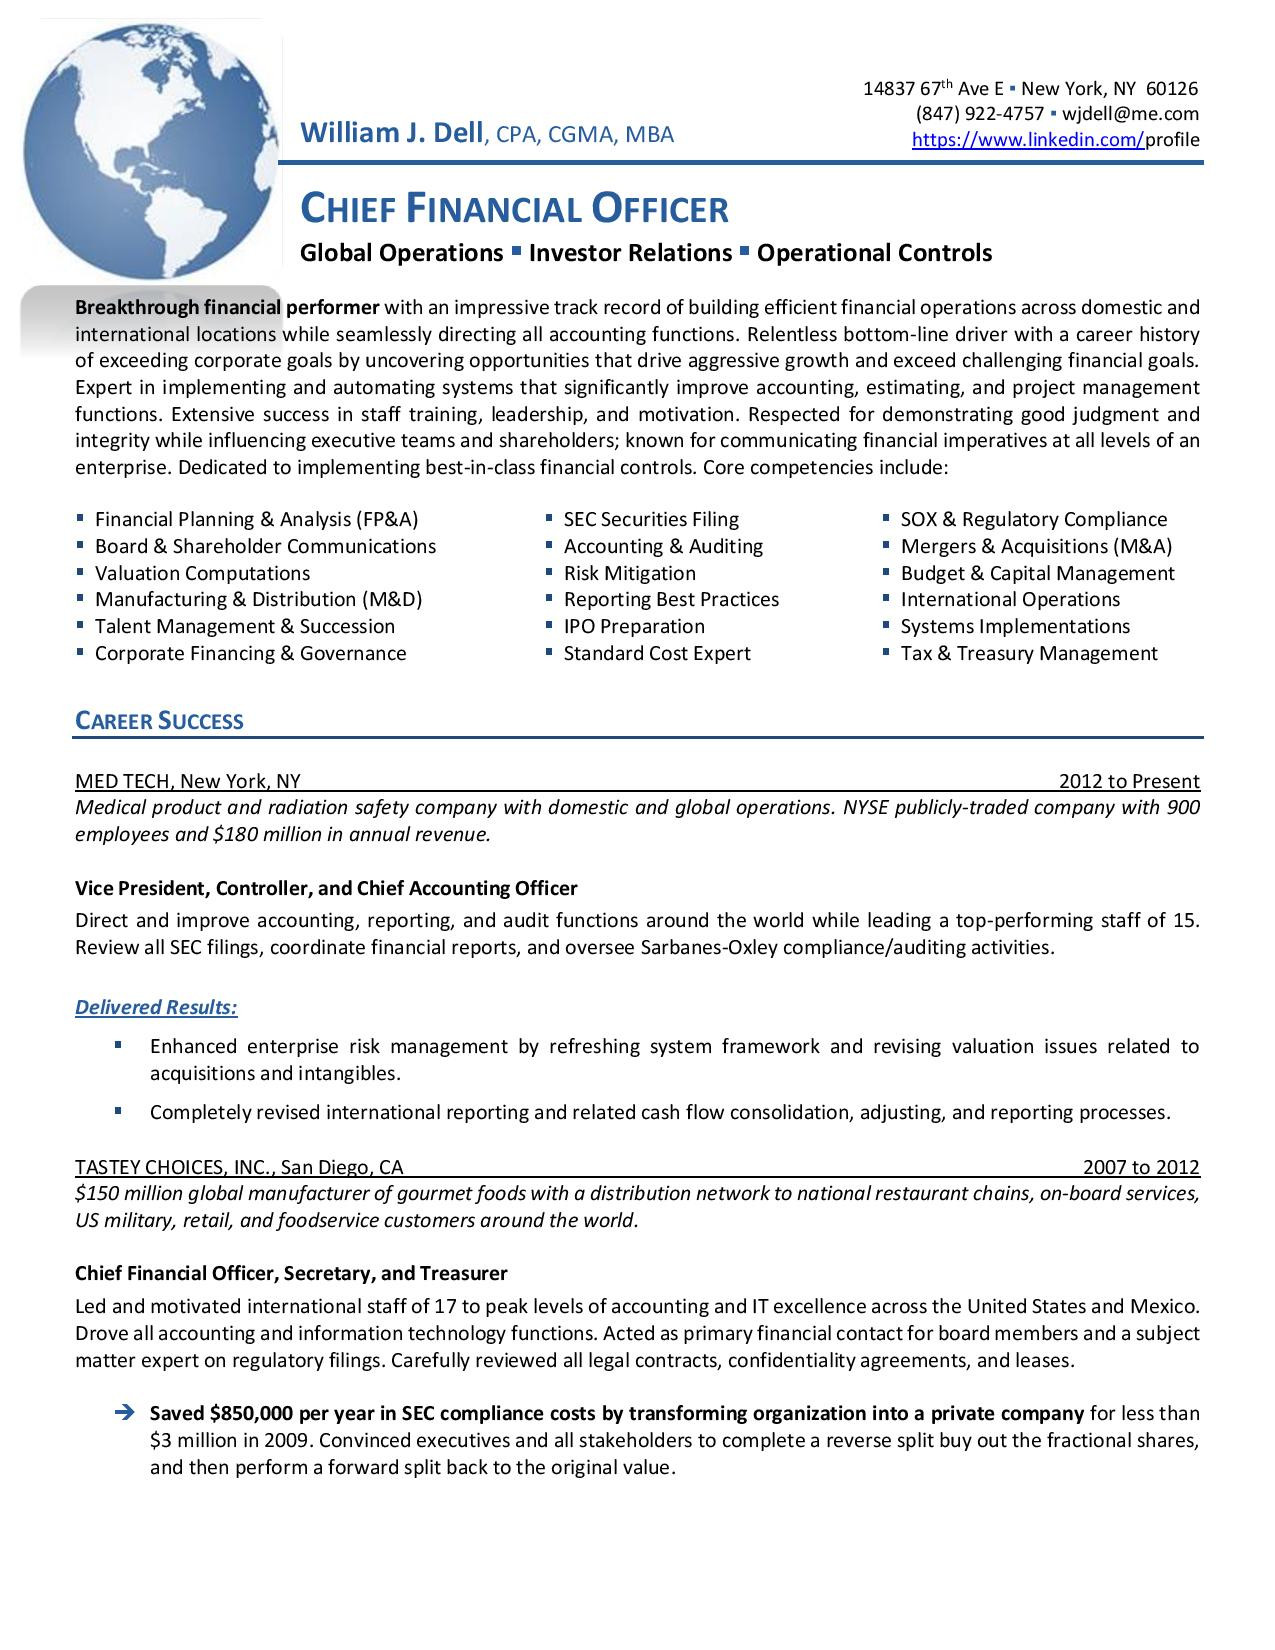 Sample Resume Of Cfo In India Samples – Executive Resume Services